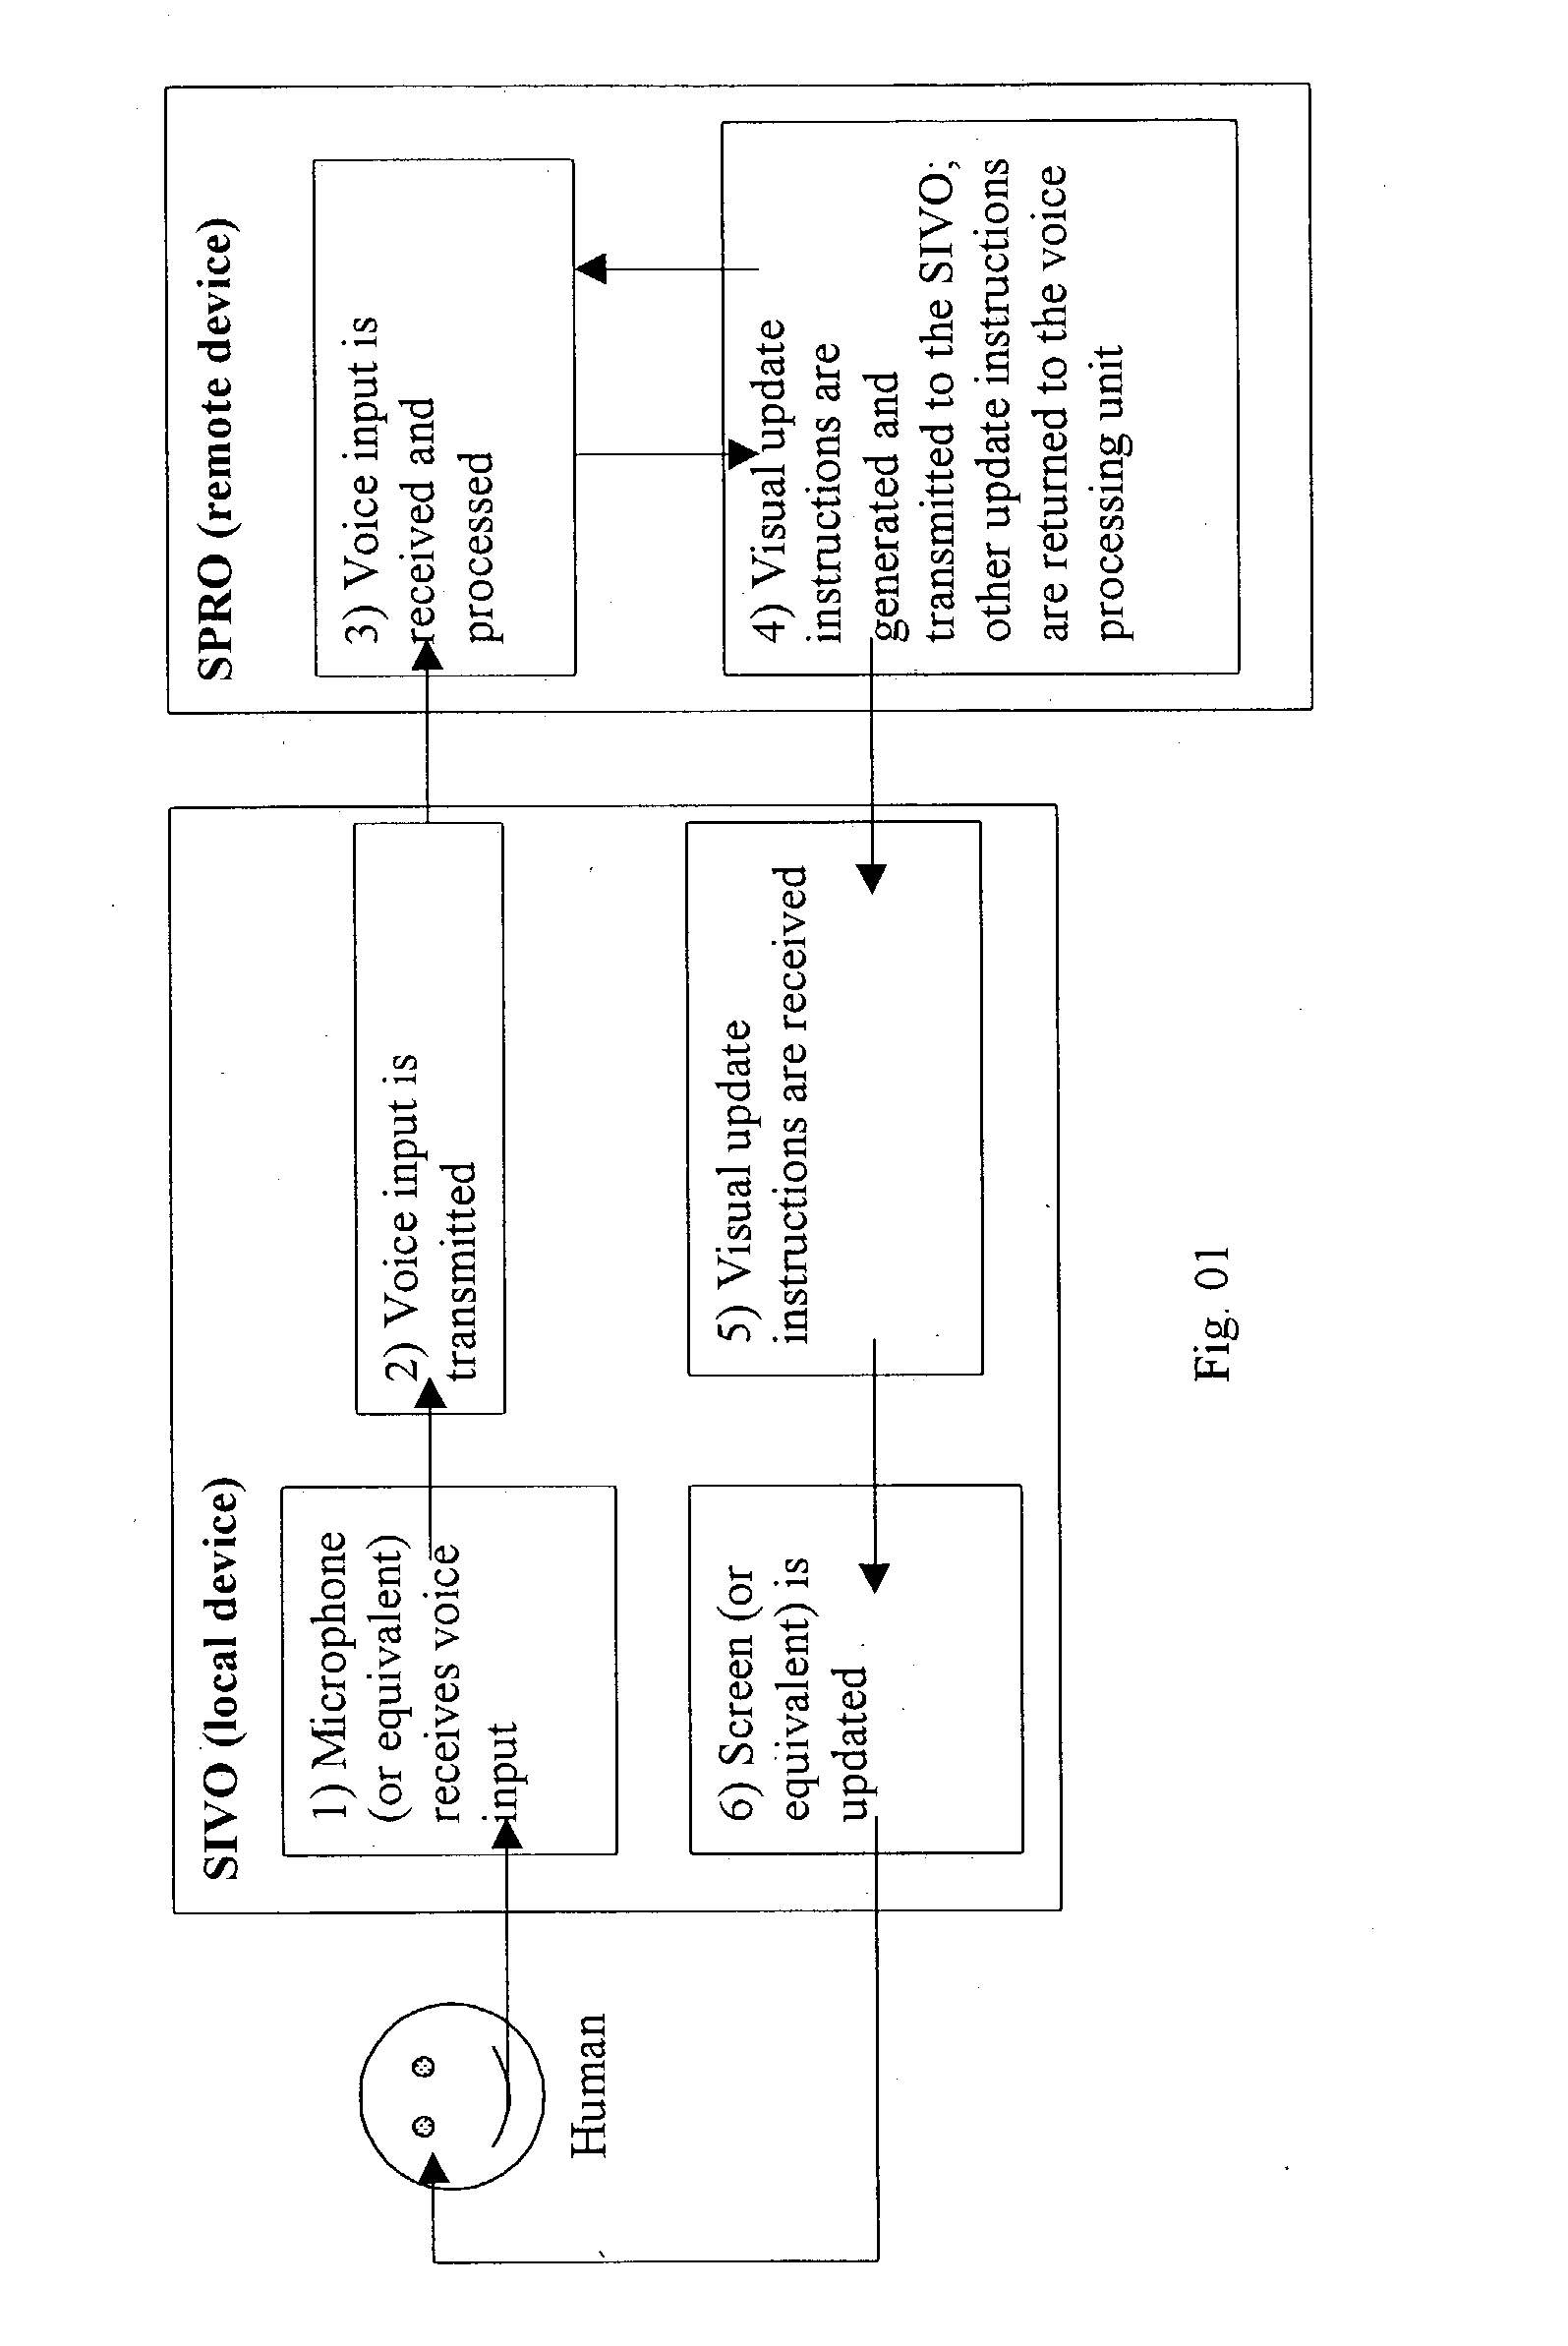 Use of local voice input and remote voice processing to control a local visual display